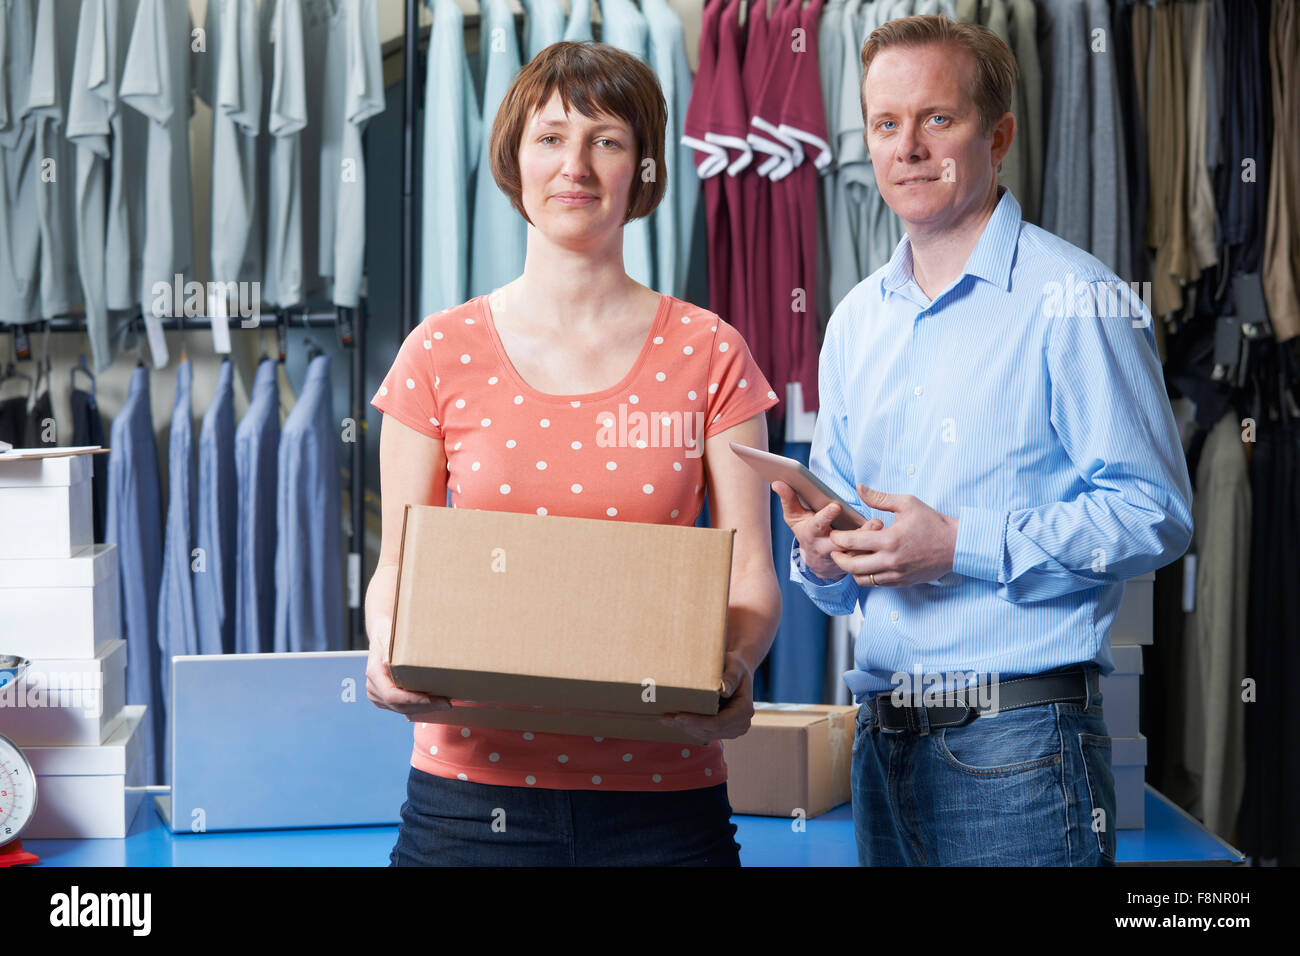 Couple Running On Line Clothing Store Stock Photo